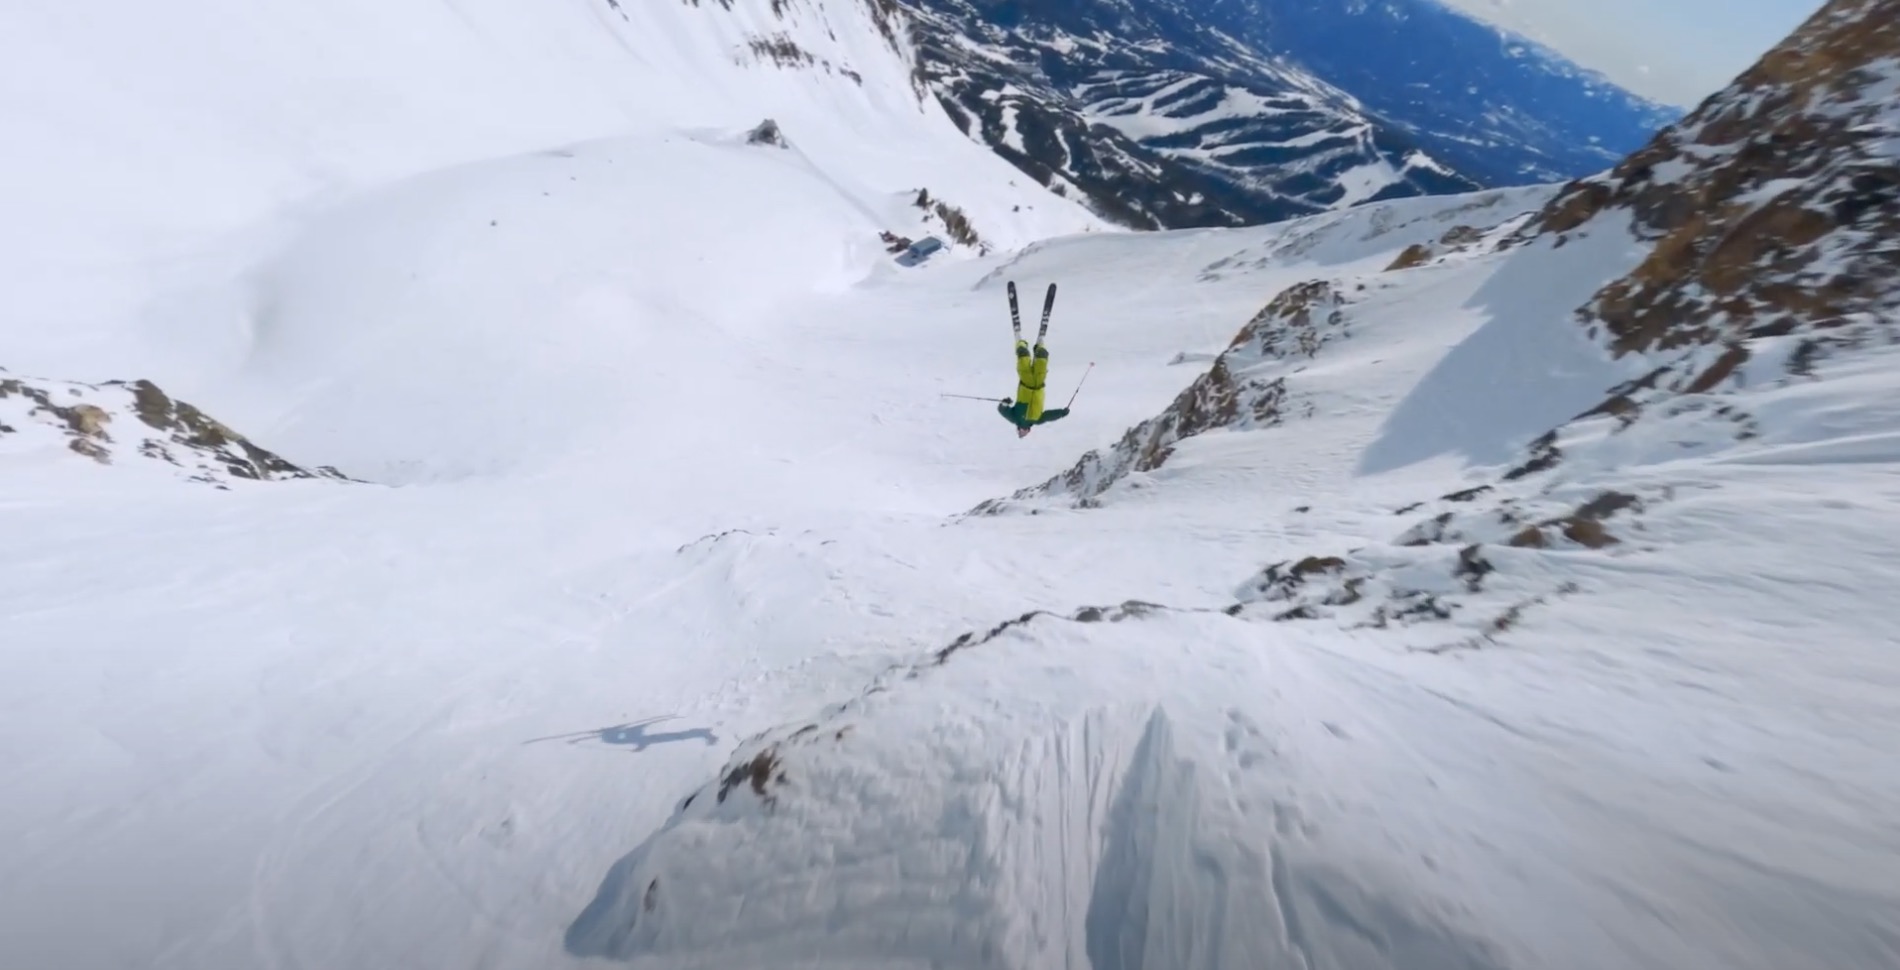 WATCH: The Ultimate Top-To-Bottom Run At Big Sky Resort